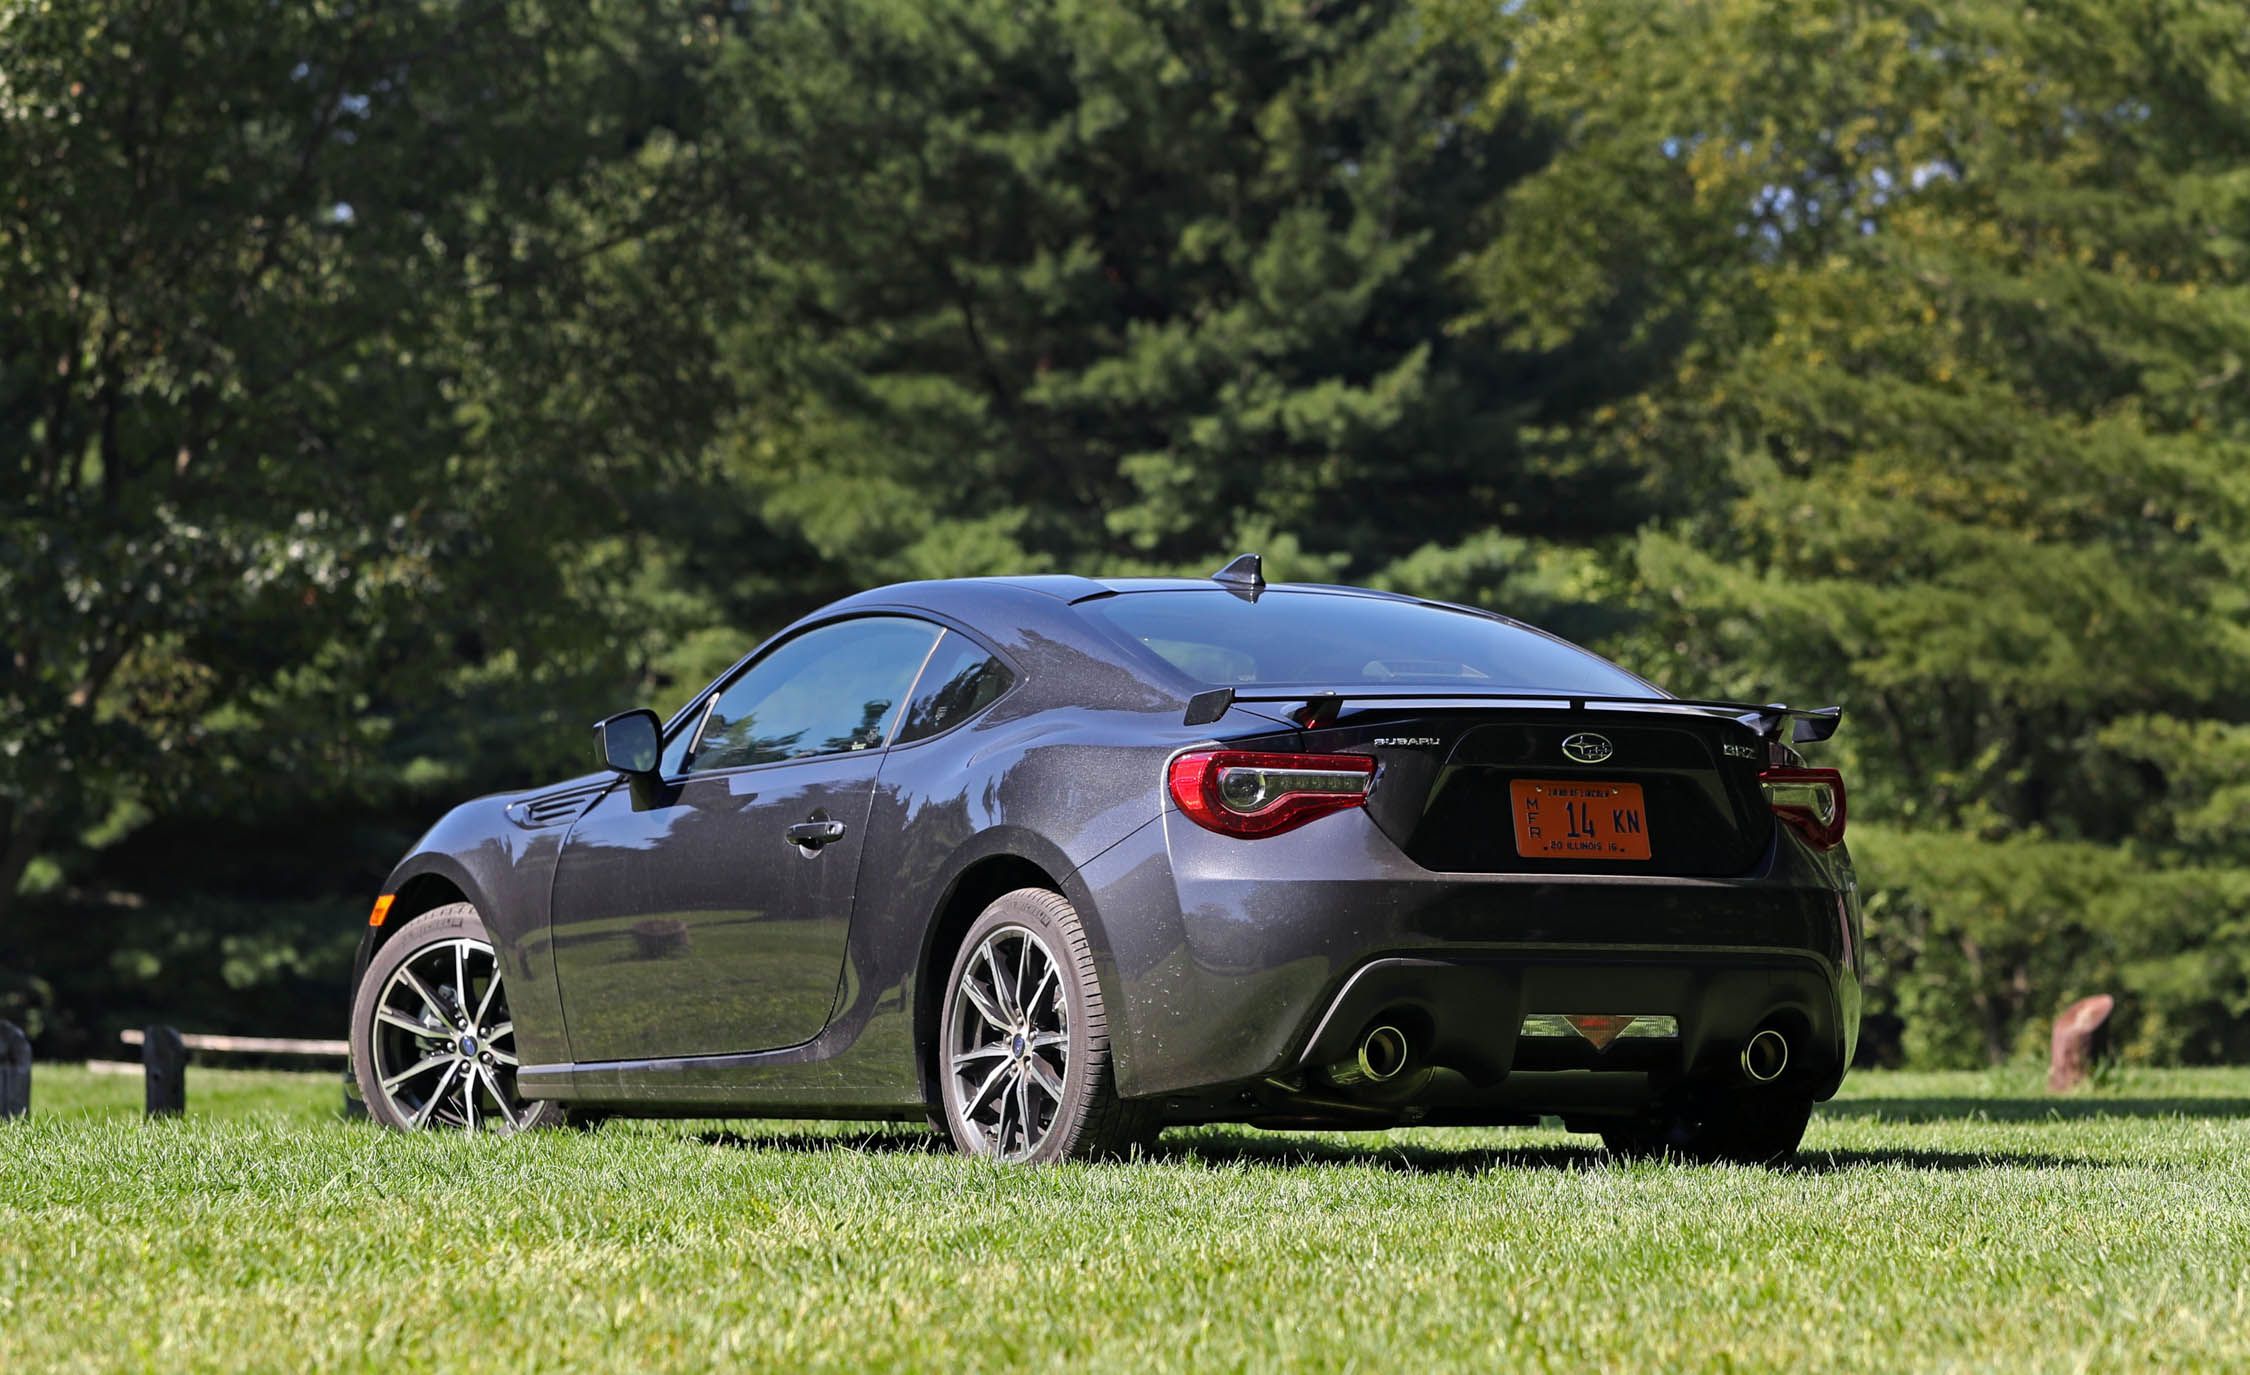 2017 Subaru Brz Exterior Rear And Side (View 23 of 27)